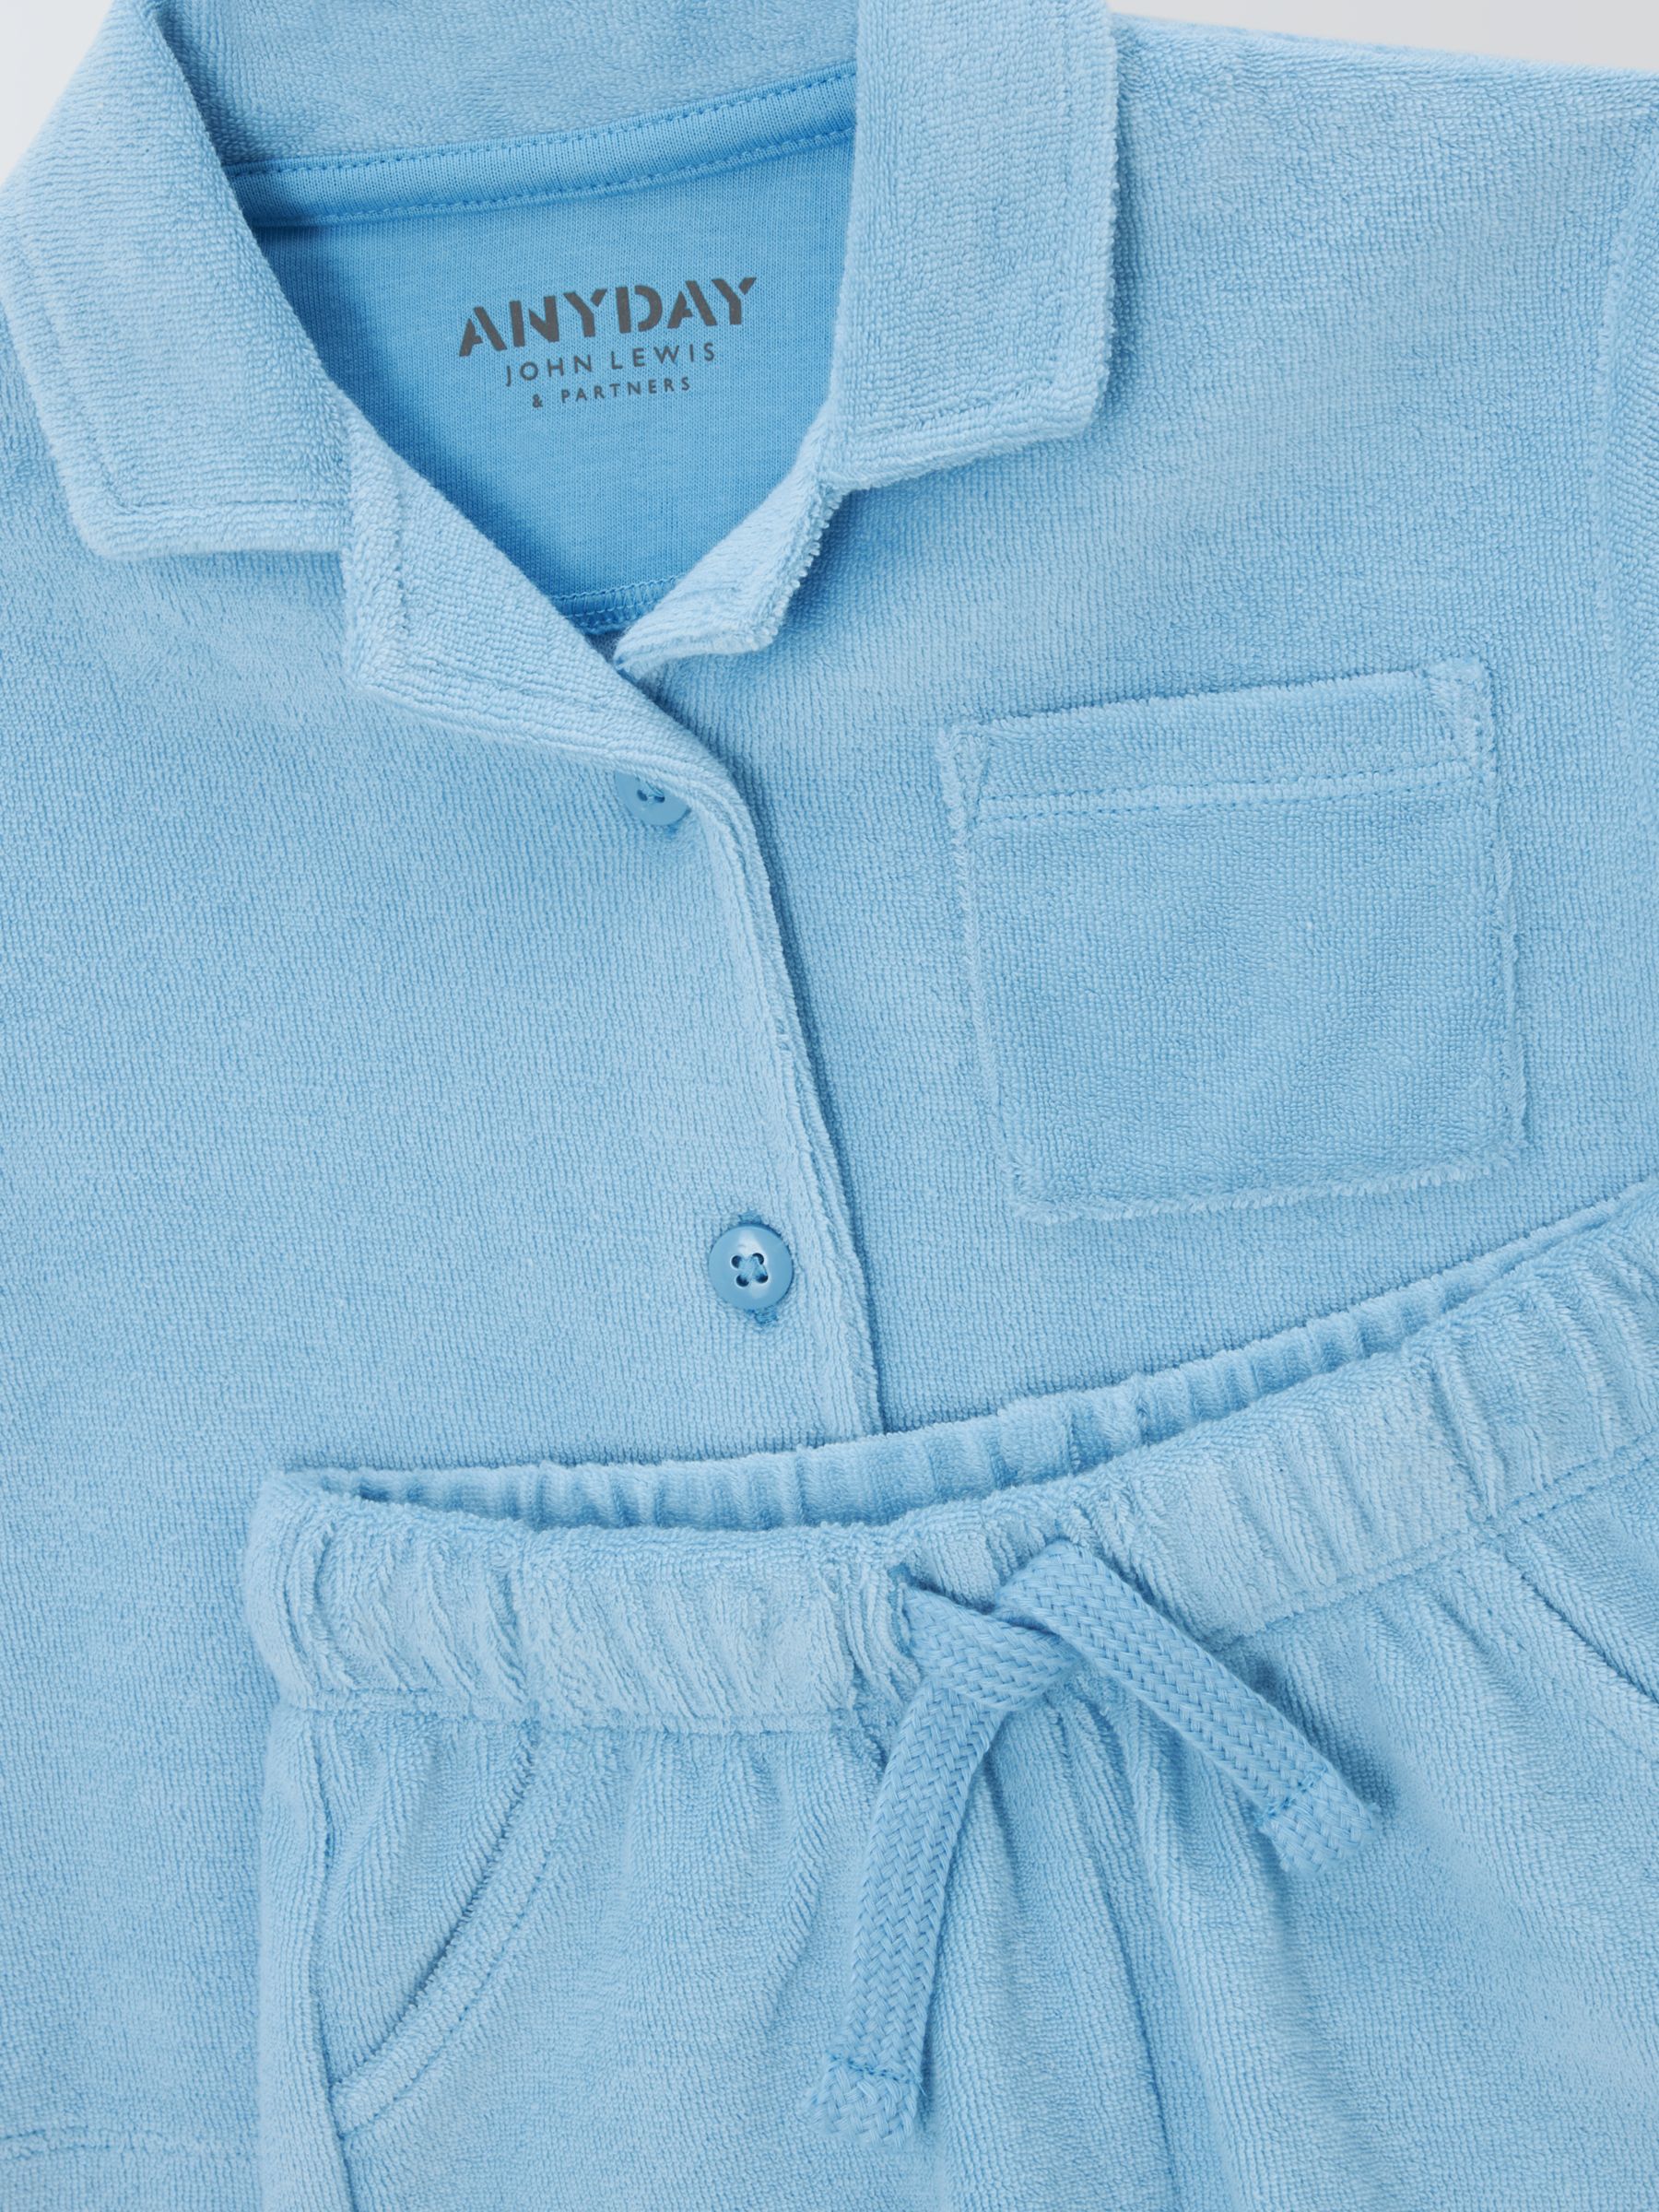 Buy John Lewis ANYDAY Baby Towelling Shirt and Shorts Set, Multi Online at johnlewis.com